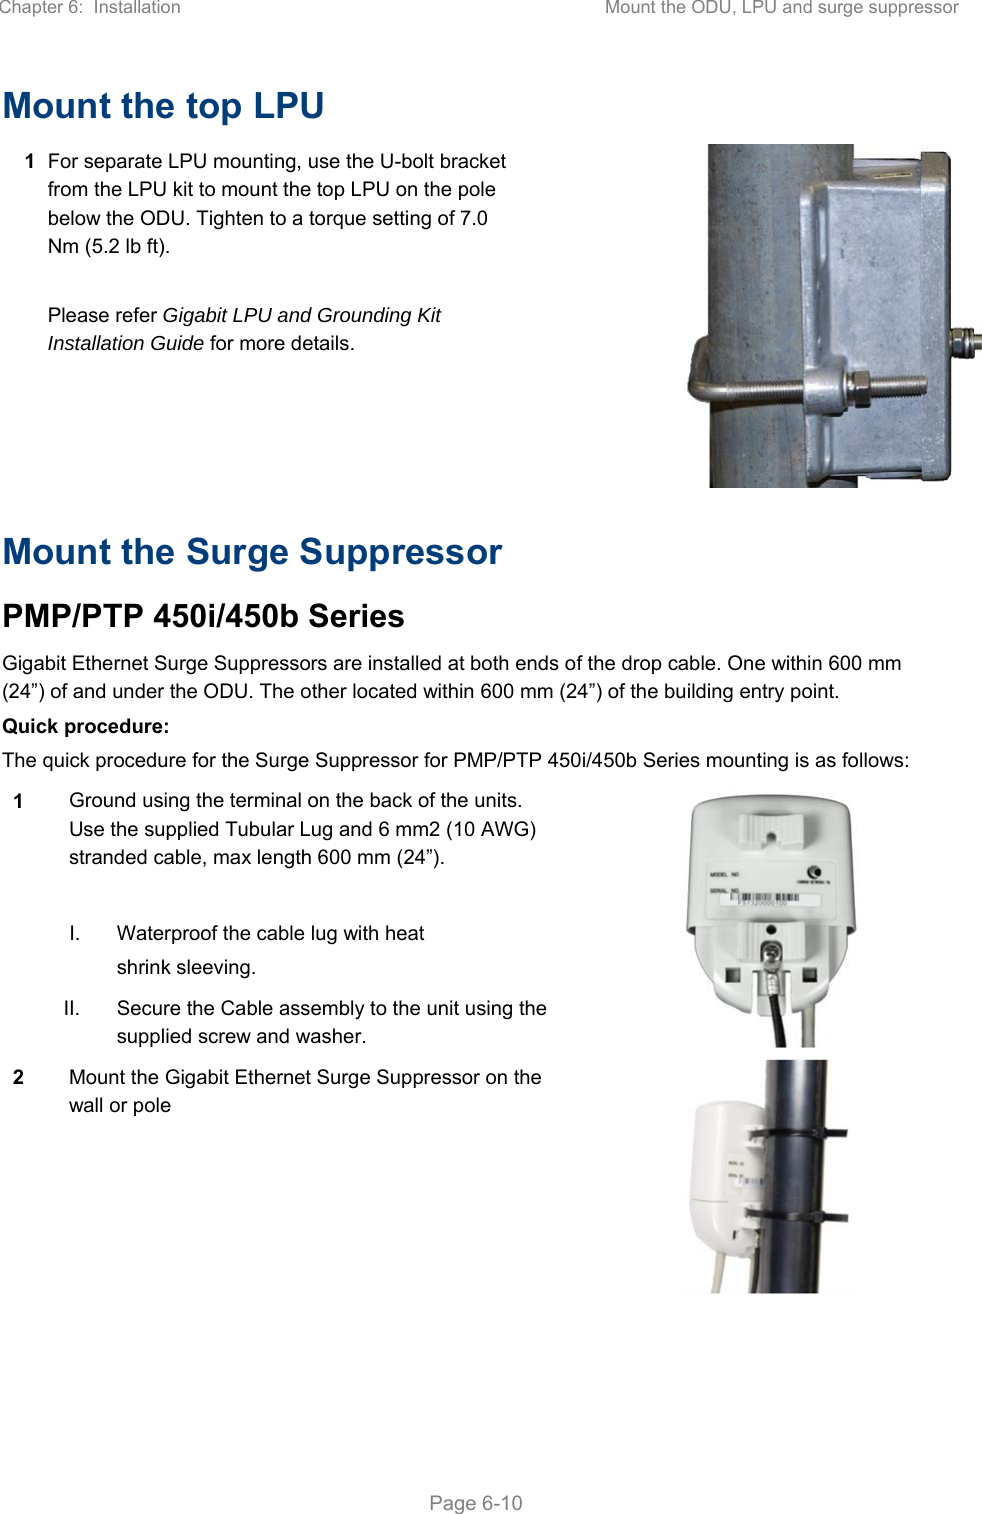 Chapter 6:  Installation  Mount the ODU, LPU and surge suppressor   Page 6-10 Mount the top LPU 1 For separate LPU mounting, use the U-bolt bracket from the LPU kit to mount the top LPU on the pole below the ODU. Tighten to a torque setting of 7.0 Nm (5.2 lb ft).  Please refer Gigabit LPU and Grounding Kit Installation Guide for more details. Mount the Surge Suppressor PMP/PTP 450i/450b Series Gigabit Ethernet Surge Suppressors are installed at both ends of the drop cable. One within 600 mm (24”) of and under the ODU. The other located within 600 mm (24”) of the building entry point.  Quick procedure: The quick procedure for the Surge Suppressor for PMP/PTP 450i/450b Series mounting is as follows: 1 Ground using the terminal on the back of the units. Use the supplied Tubular Lug and 6 mm2 (10 AWG) stranded cable, max length 600 mm (24”).   I.  Waterproof the cable lug with heat shrink sleeving.  II.  Secure the Cable assembly to the unit using the supplied screw and washer. 2 Mount the Gigabit Ethernet Surge Suppressor on the wall or pole  